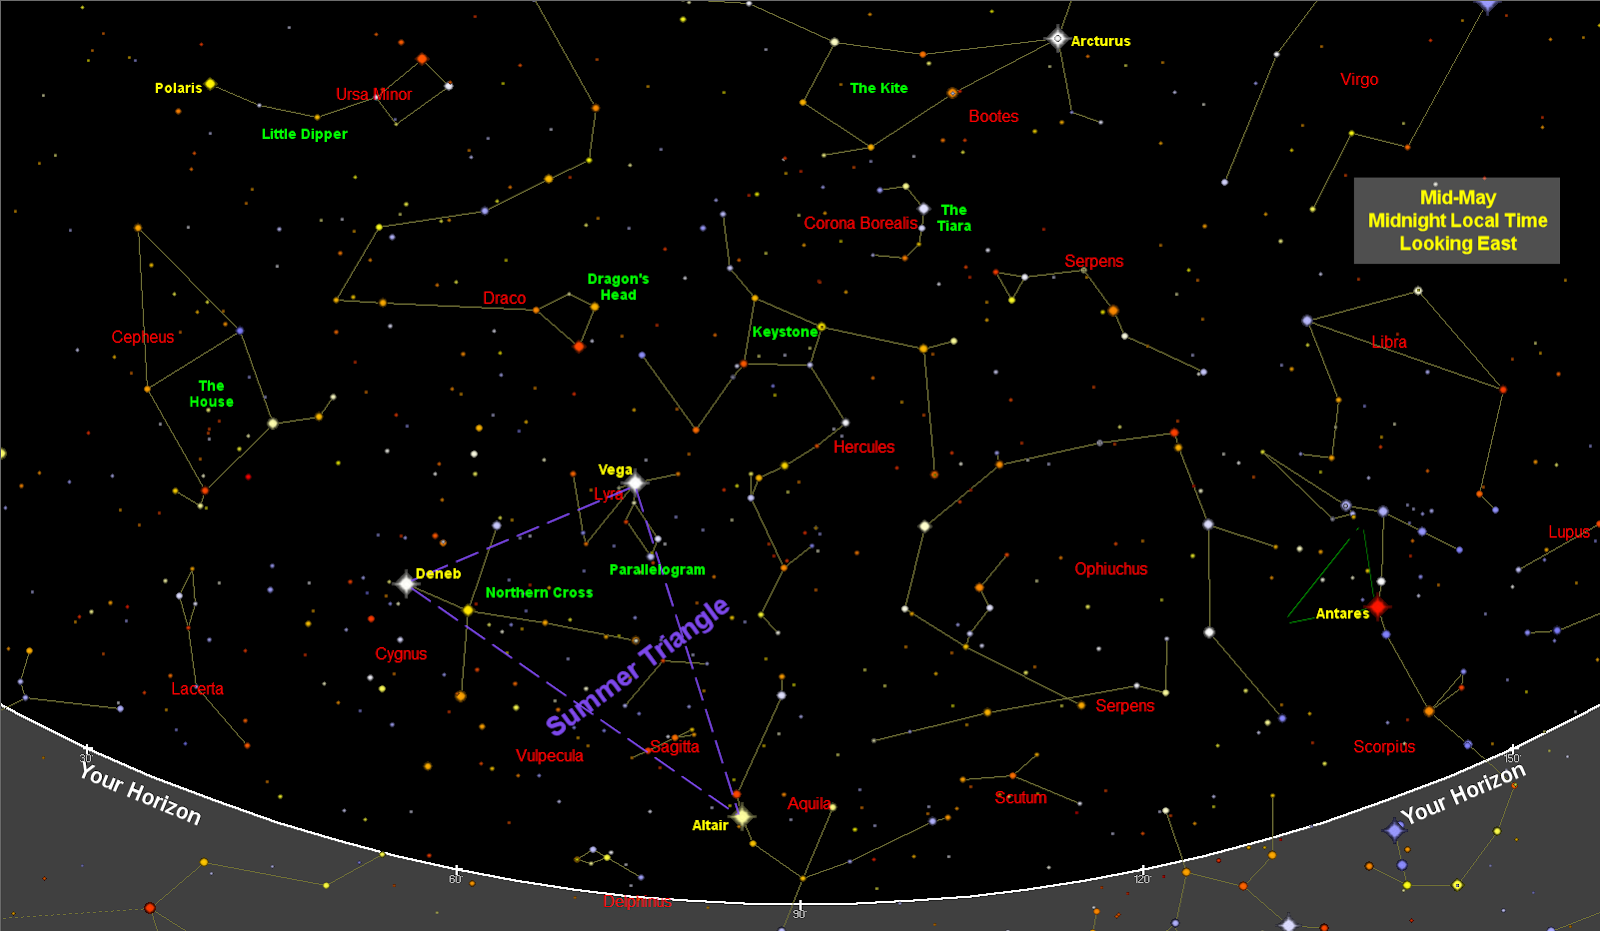 Hercules is at the centre of the map. Ursa Minor is to the North-West, appearing as a smaller version of the Big Dipper with a misshapen pan. The Summer Triangle is directly South-West of Hercules, with Vega and Deneb forming the base - extending South-Eastwards to the tip with Altair.